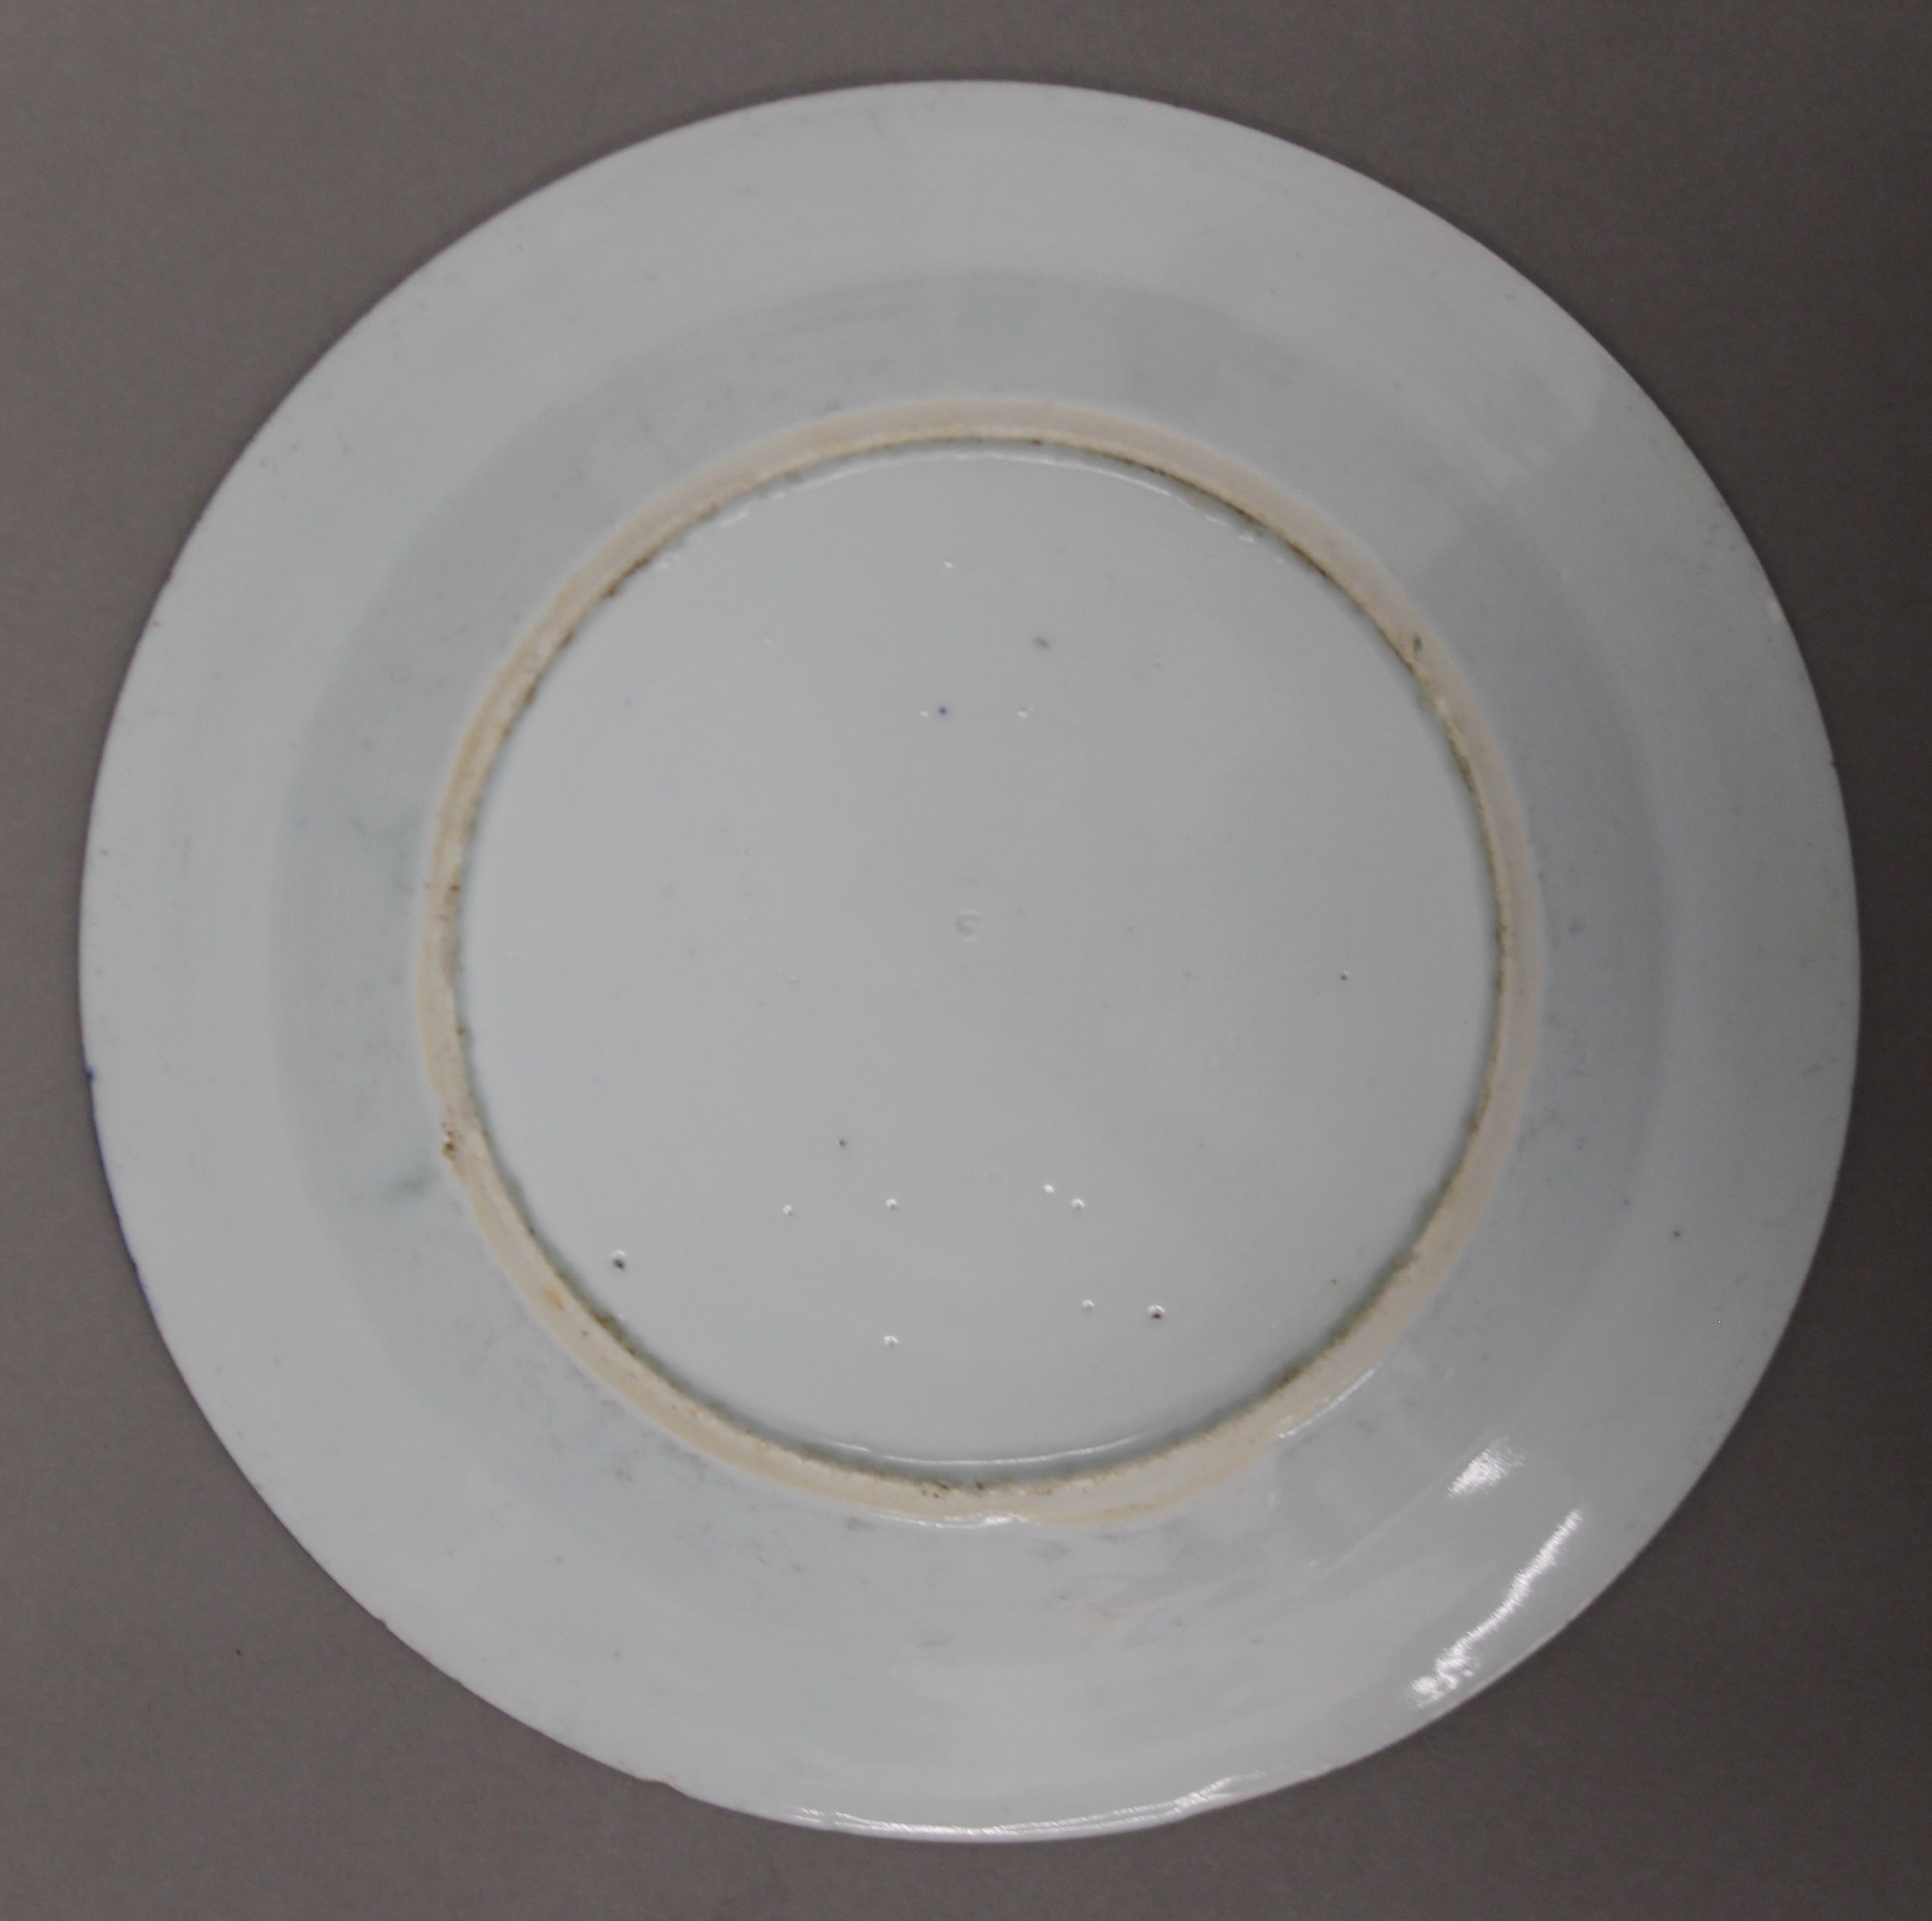 Four 18th century Chinese blue and white porcelain plates. Each approximately 21.5 cm diameter. - Image 4 of 4